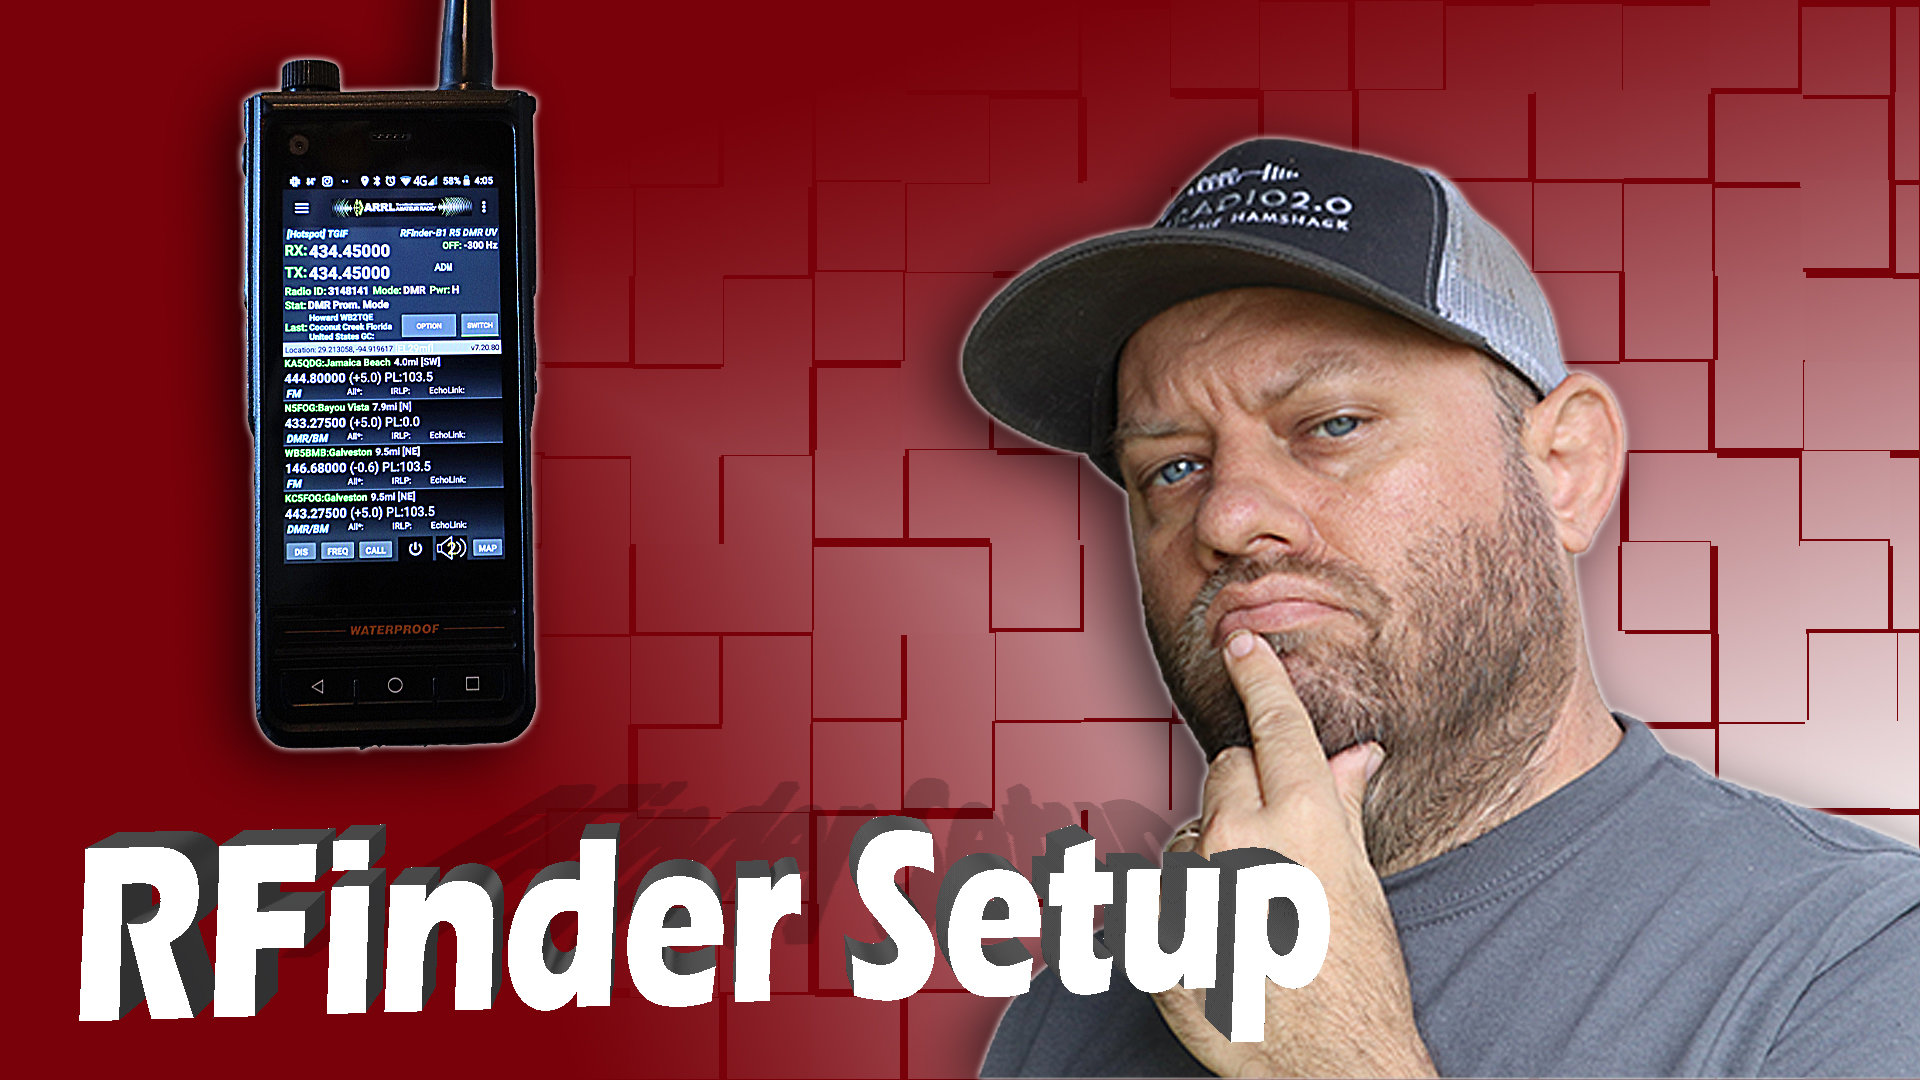 Episode 421: RFinder B1 Android DMR Radio Unboxing and Initial Setup – RFinder Repeater Directory